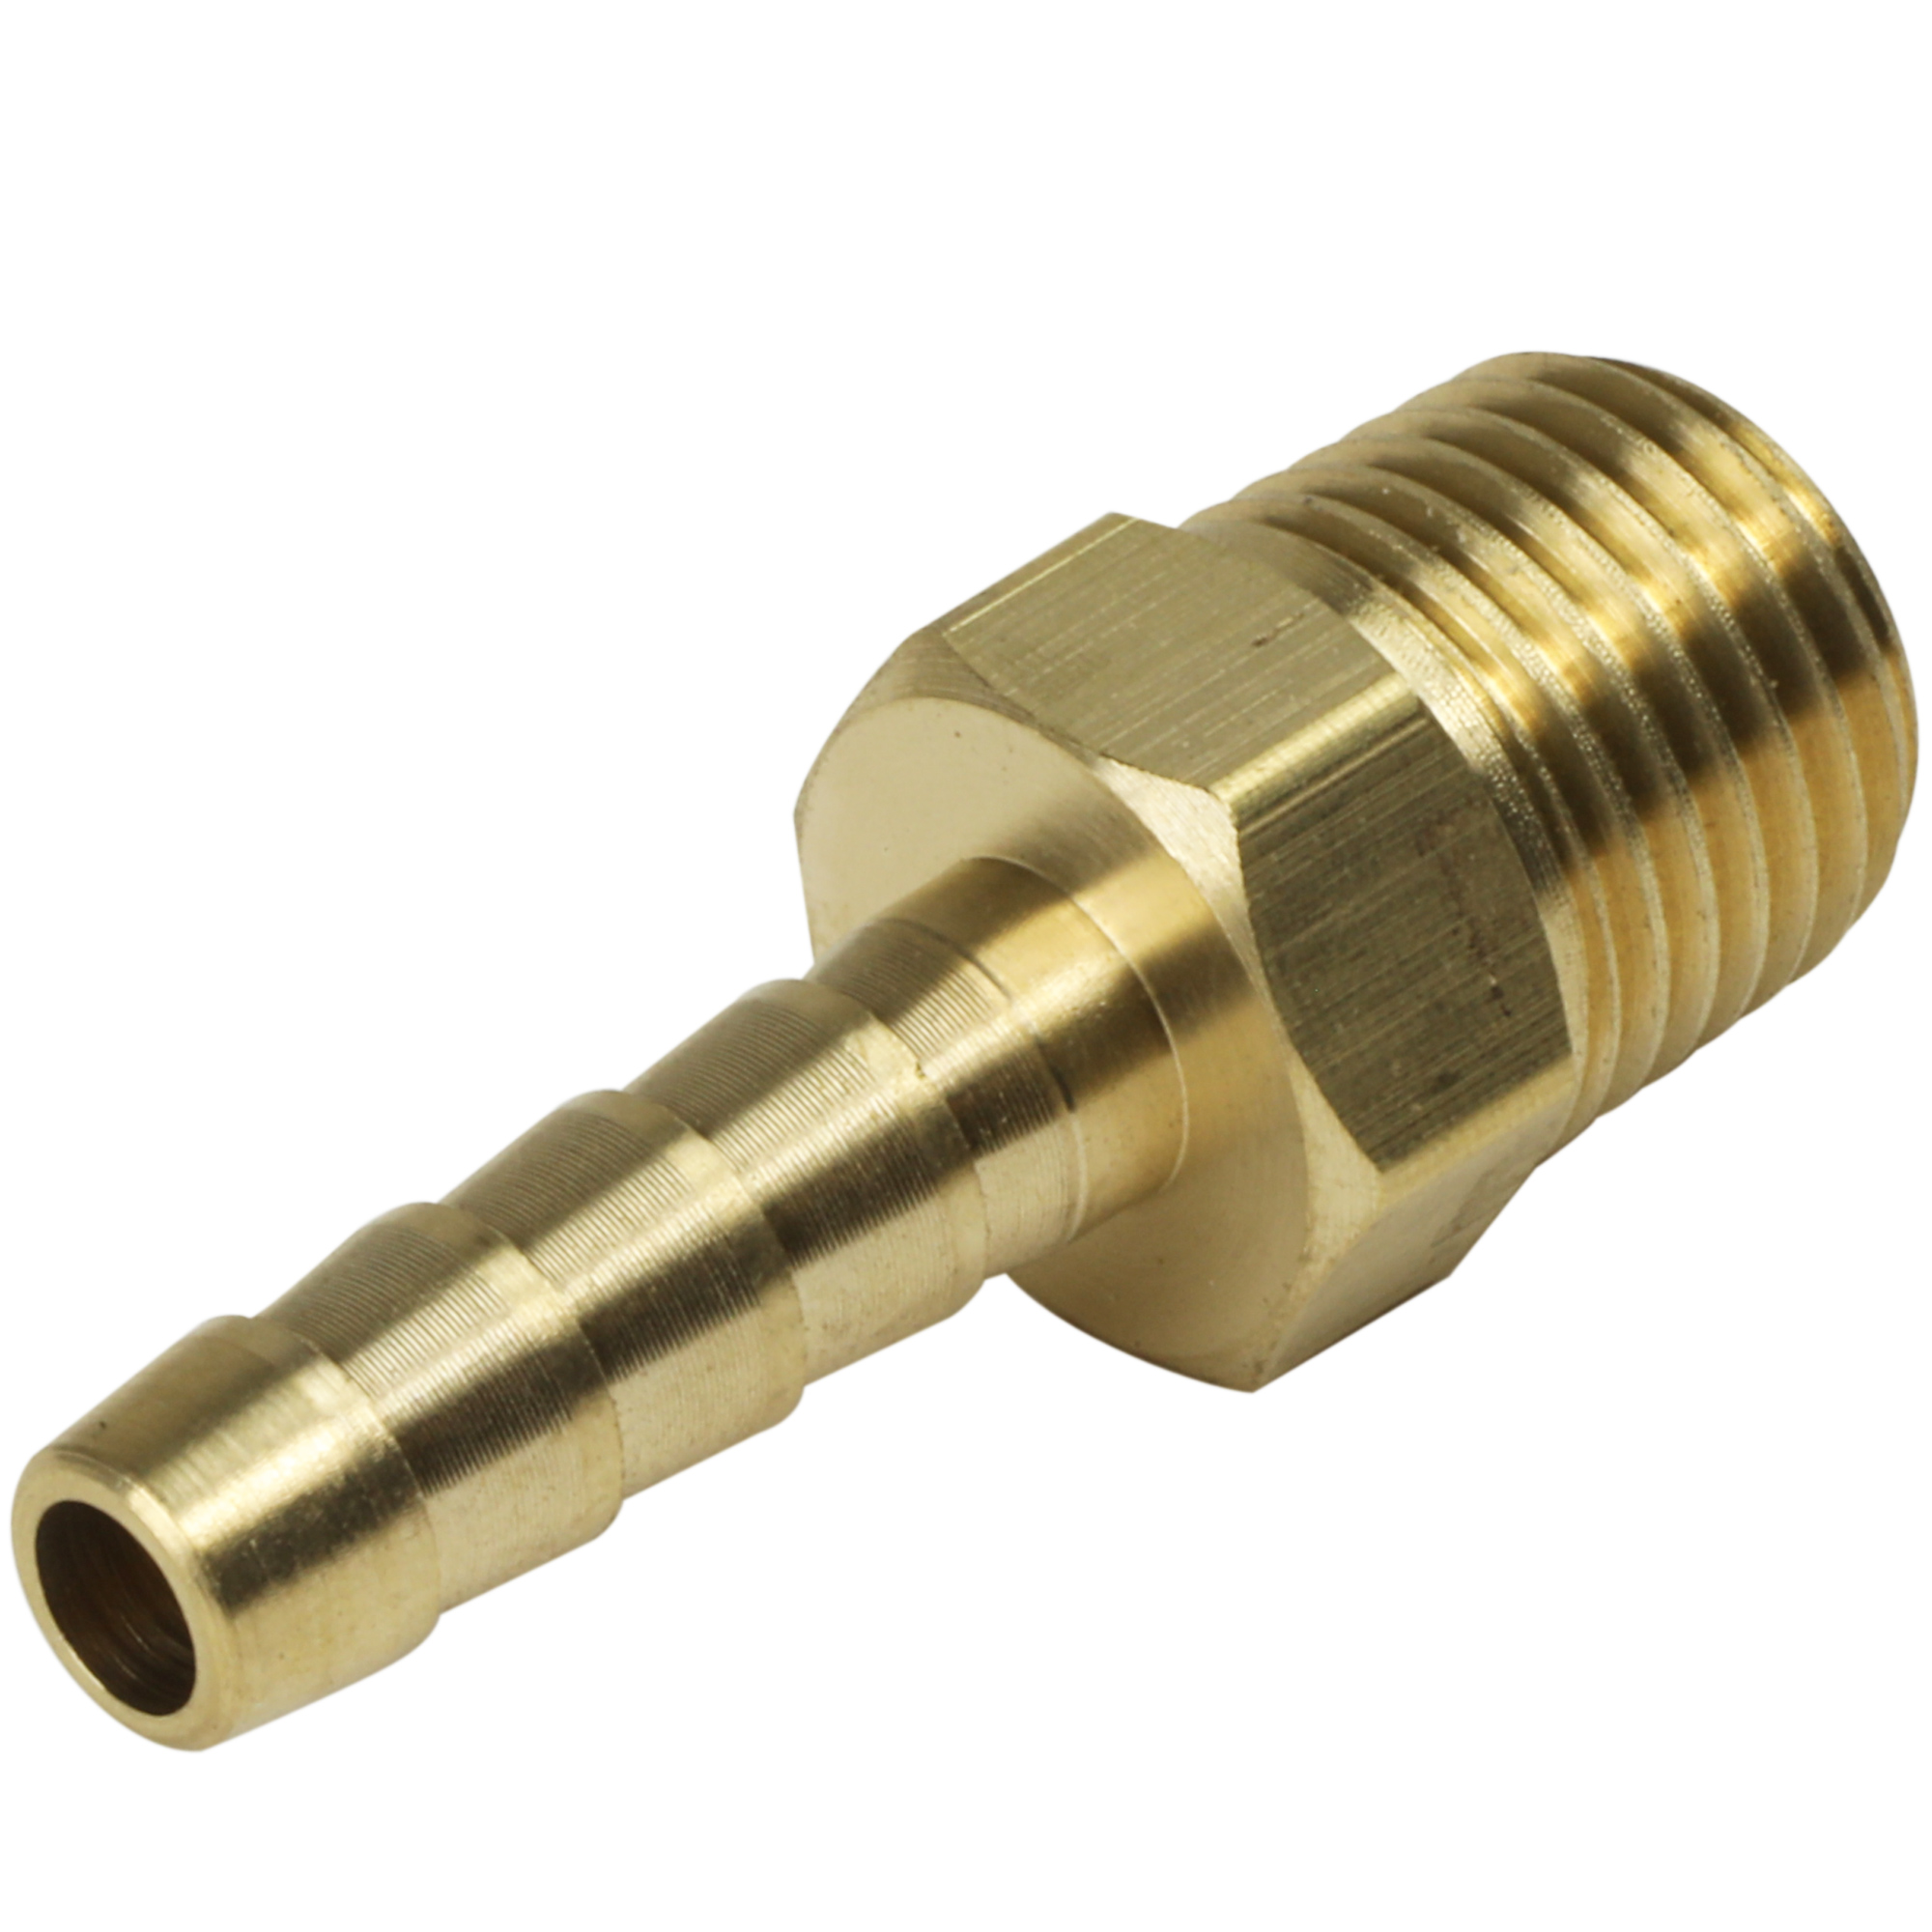 https://media.easycomposites.co.uk/products/HTC-6-6mm-quarter-bsp-inch-hose-tail-connector.jpg